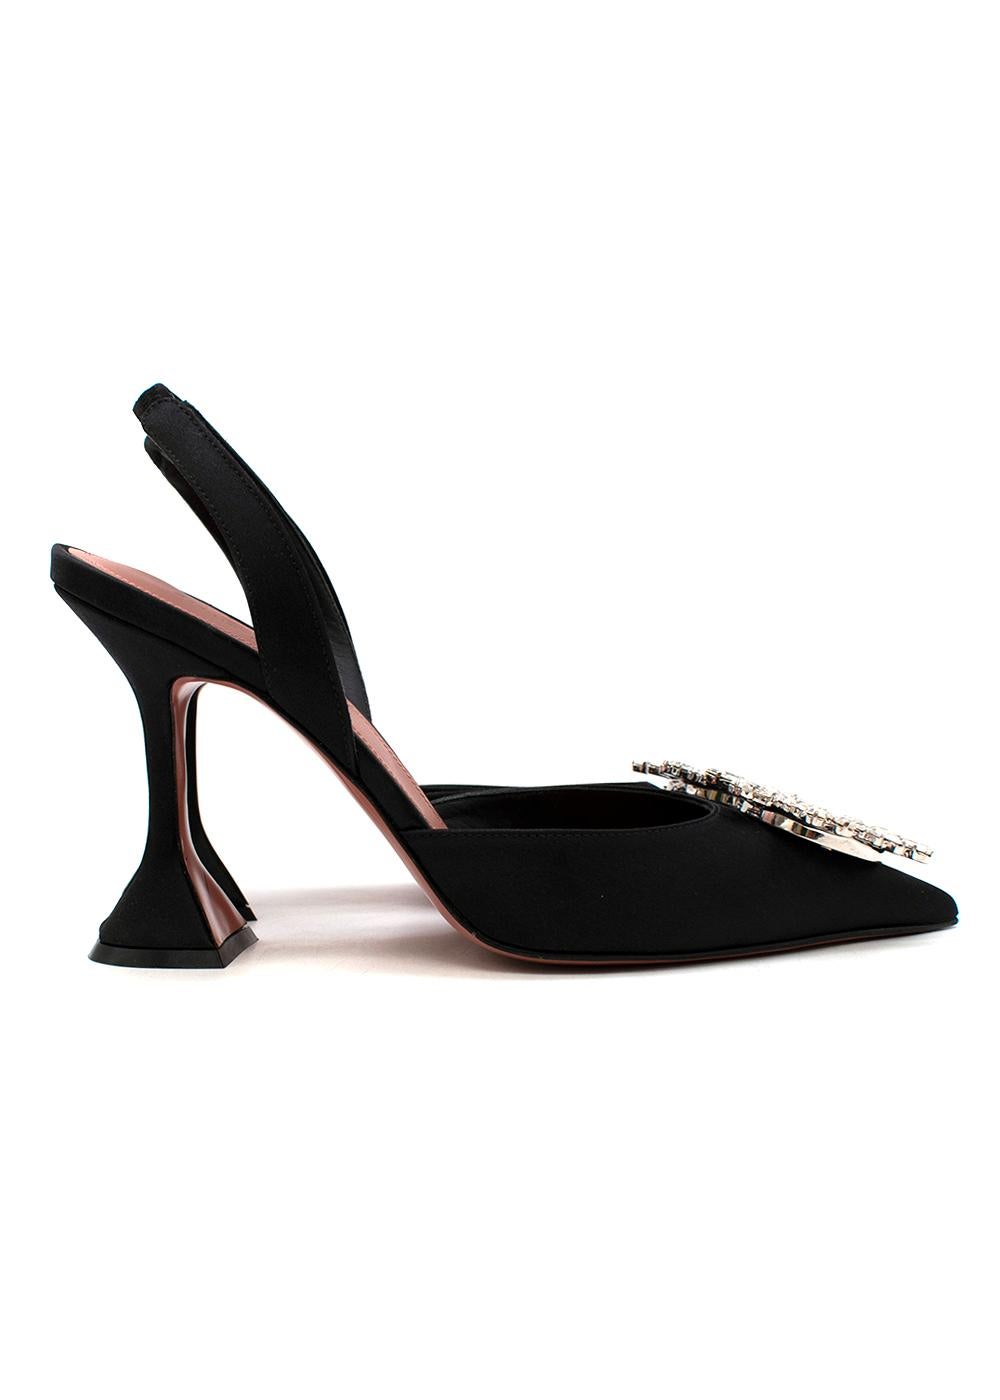 Amina Muaddi Black Satin Begum Slingbacks

-Satin finish
-Crystal cut-out embellishment
-Elasticated slingback strap
-Pointed toe
-Covered modified stiletto heel
-Branded leather insole

Material: 

Satin 100%

Made in Italy 

PLEASE NOTE, THESE